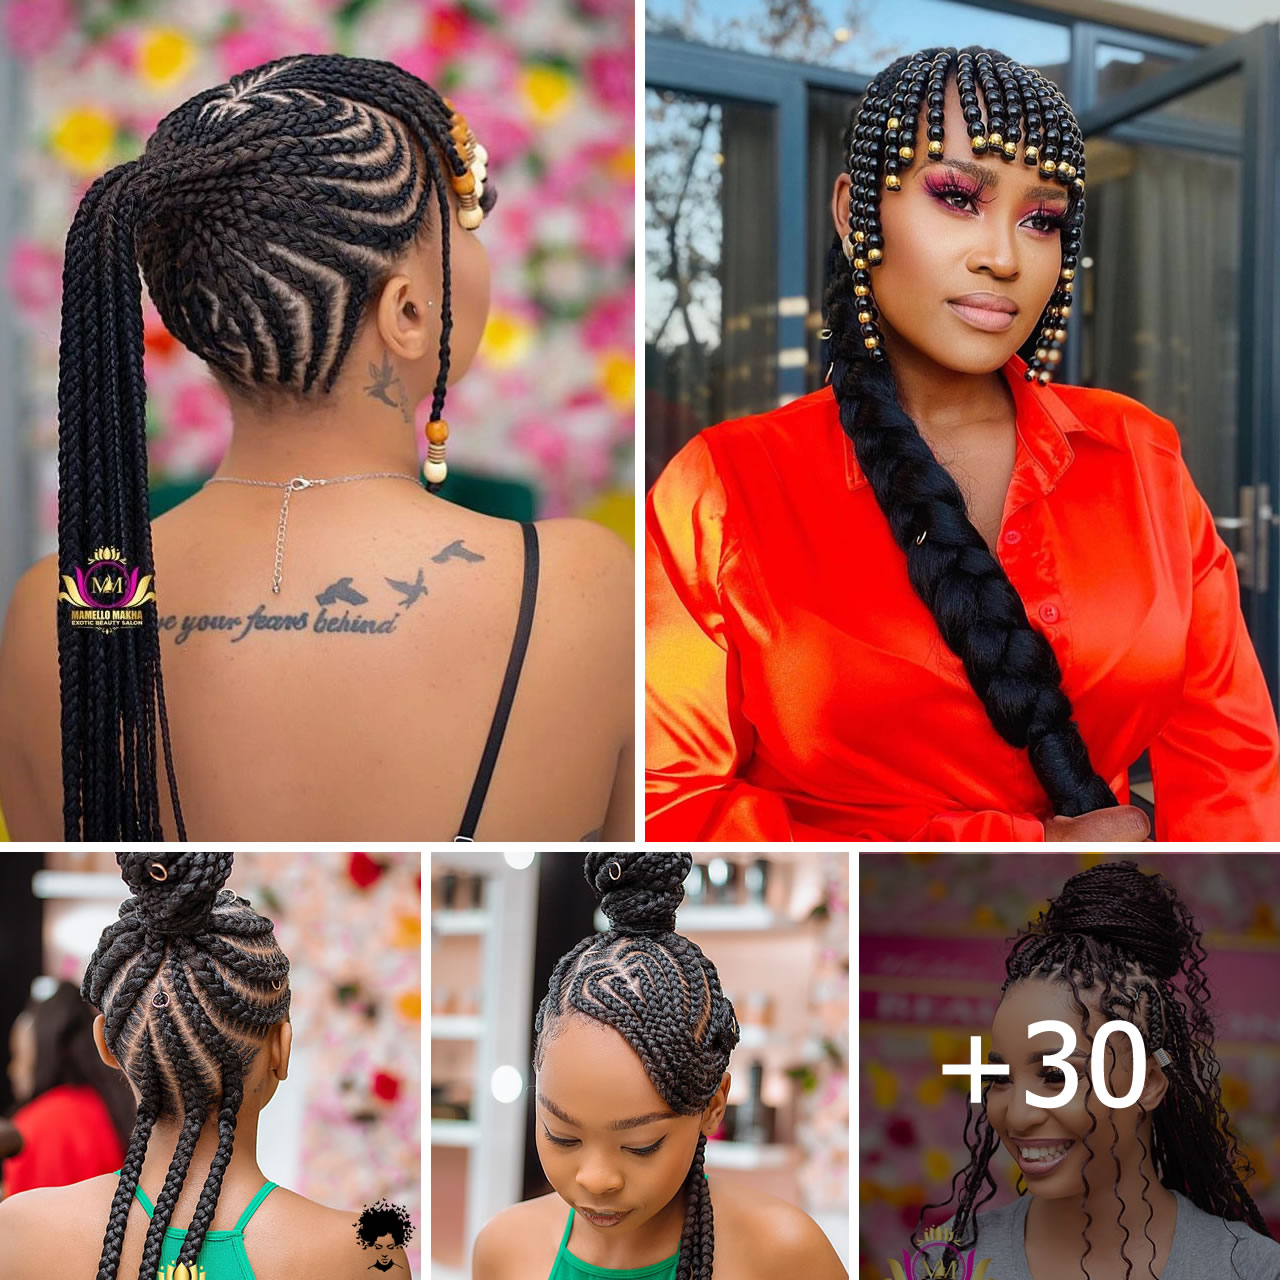 Stylish Recent Braided Hairstyles You Should Consider Volume 6